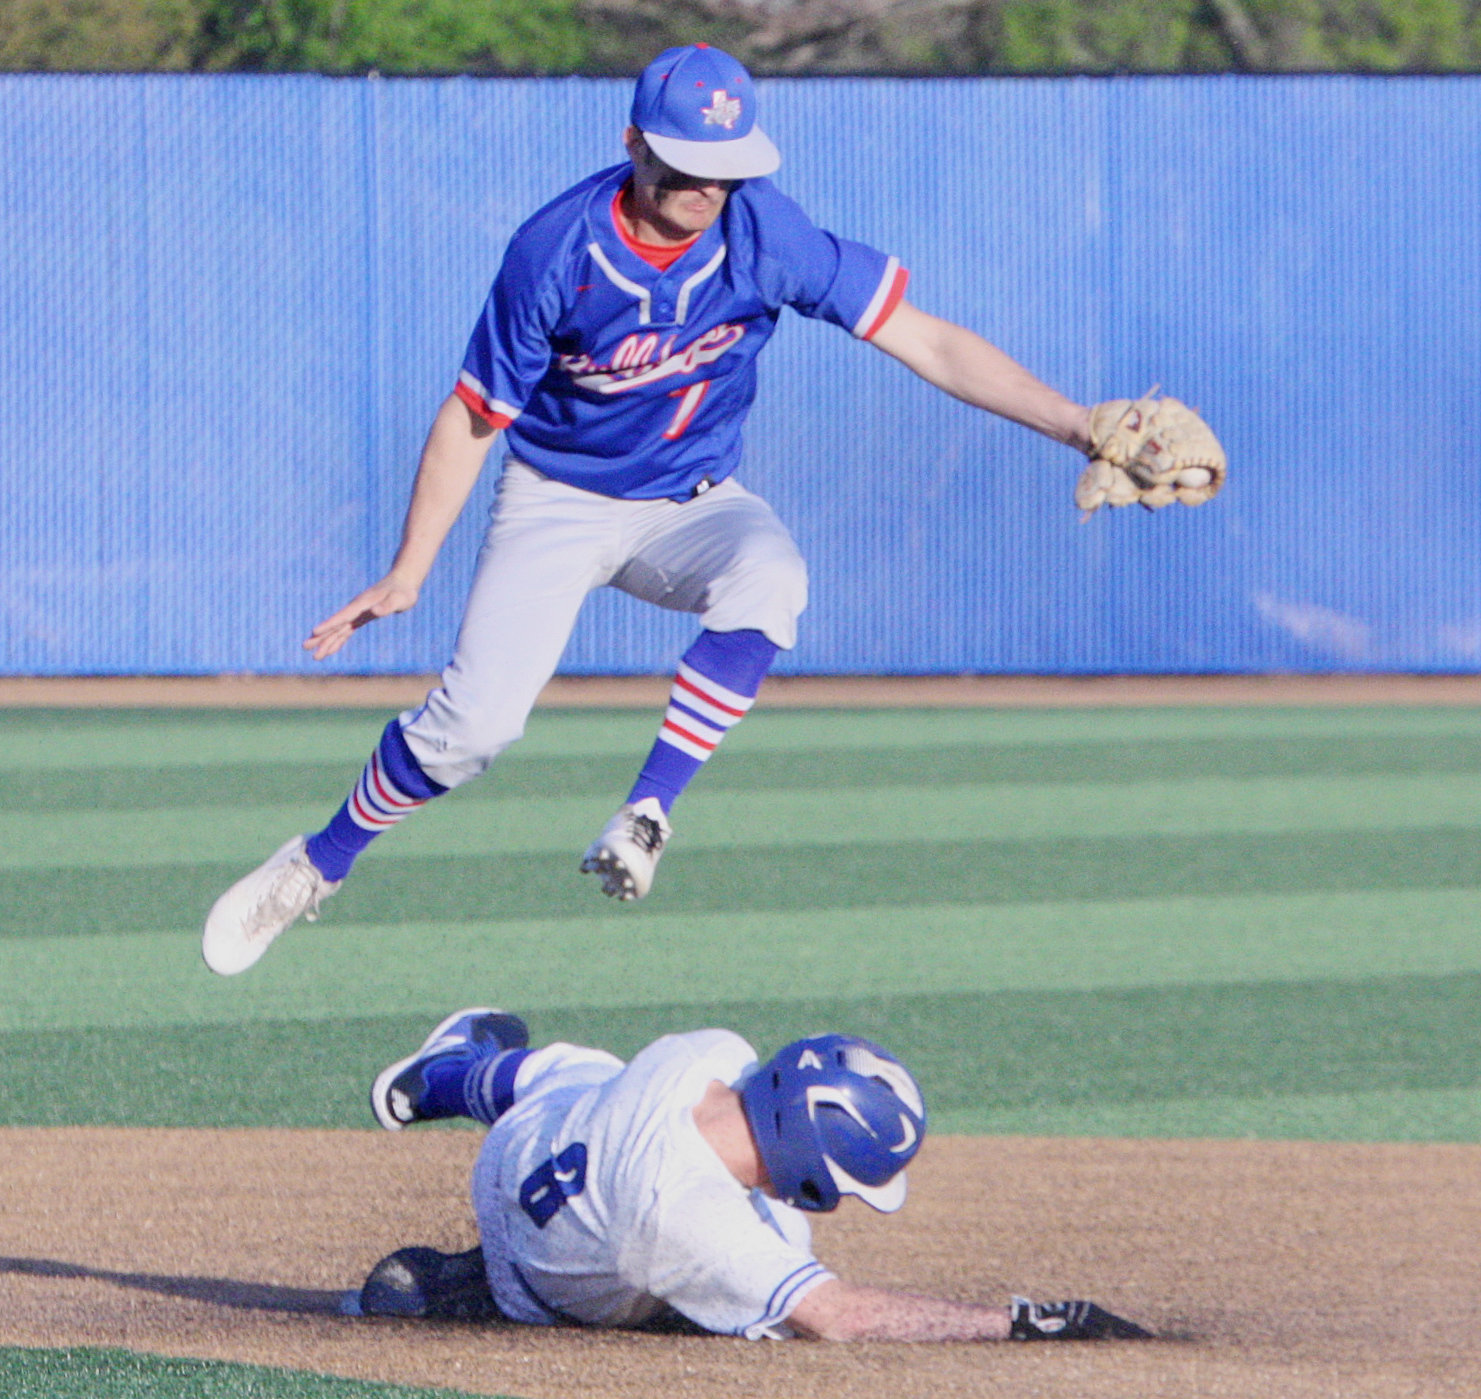 Quitman’s Ty Holland goes up to field catcher Trey Berry’s throw at second base.